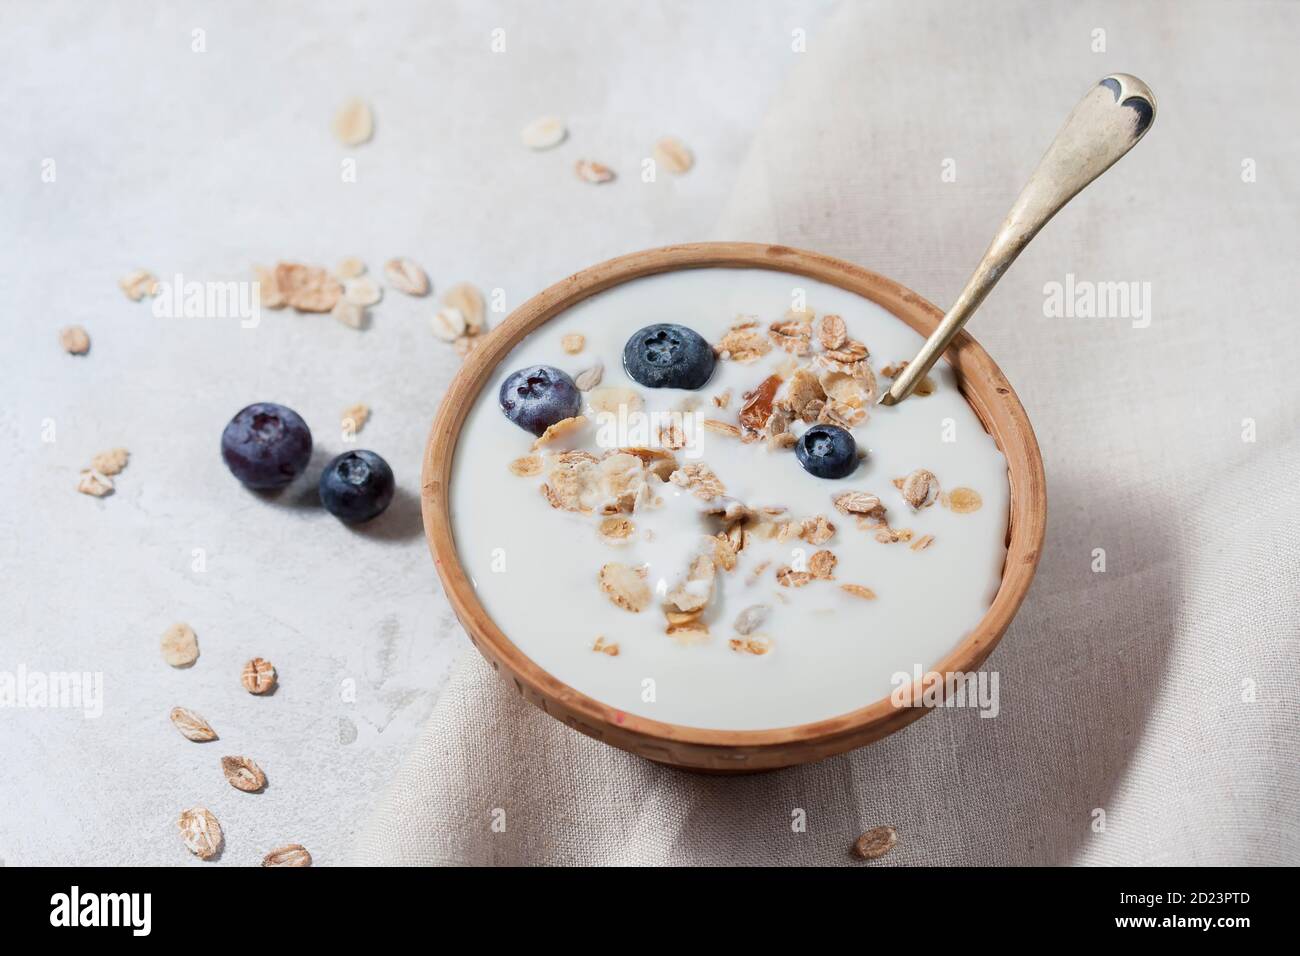 Homemade yogurt with granola and berries in a ceramic bowl on a light background. Concept healthy breakfast. Stock Photo